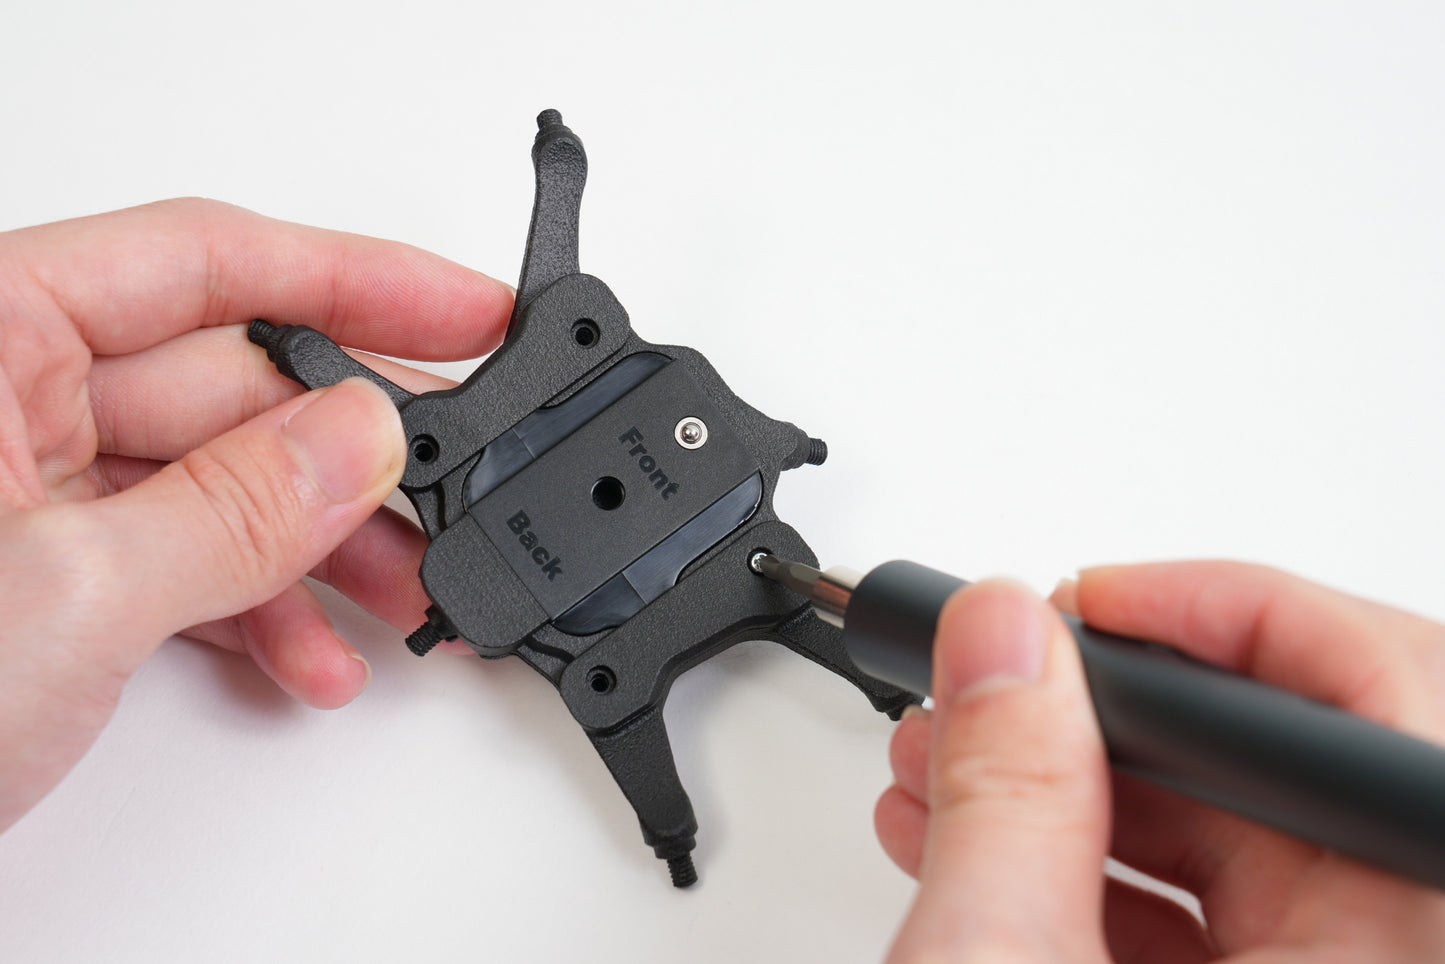 Universal Mounting Adaptor for Optitrack / Vicon